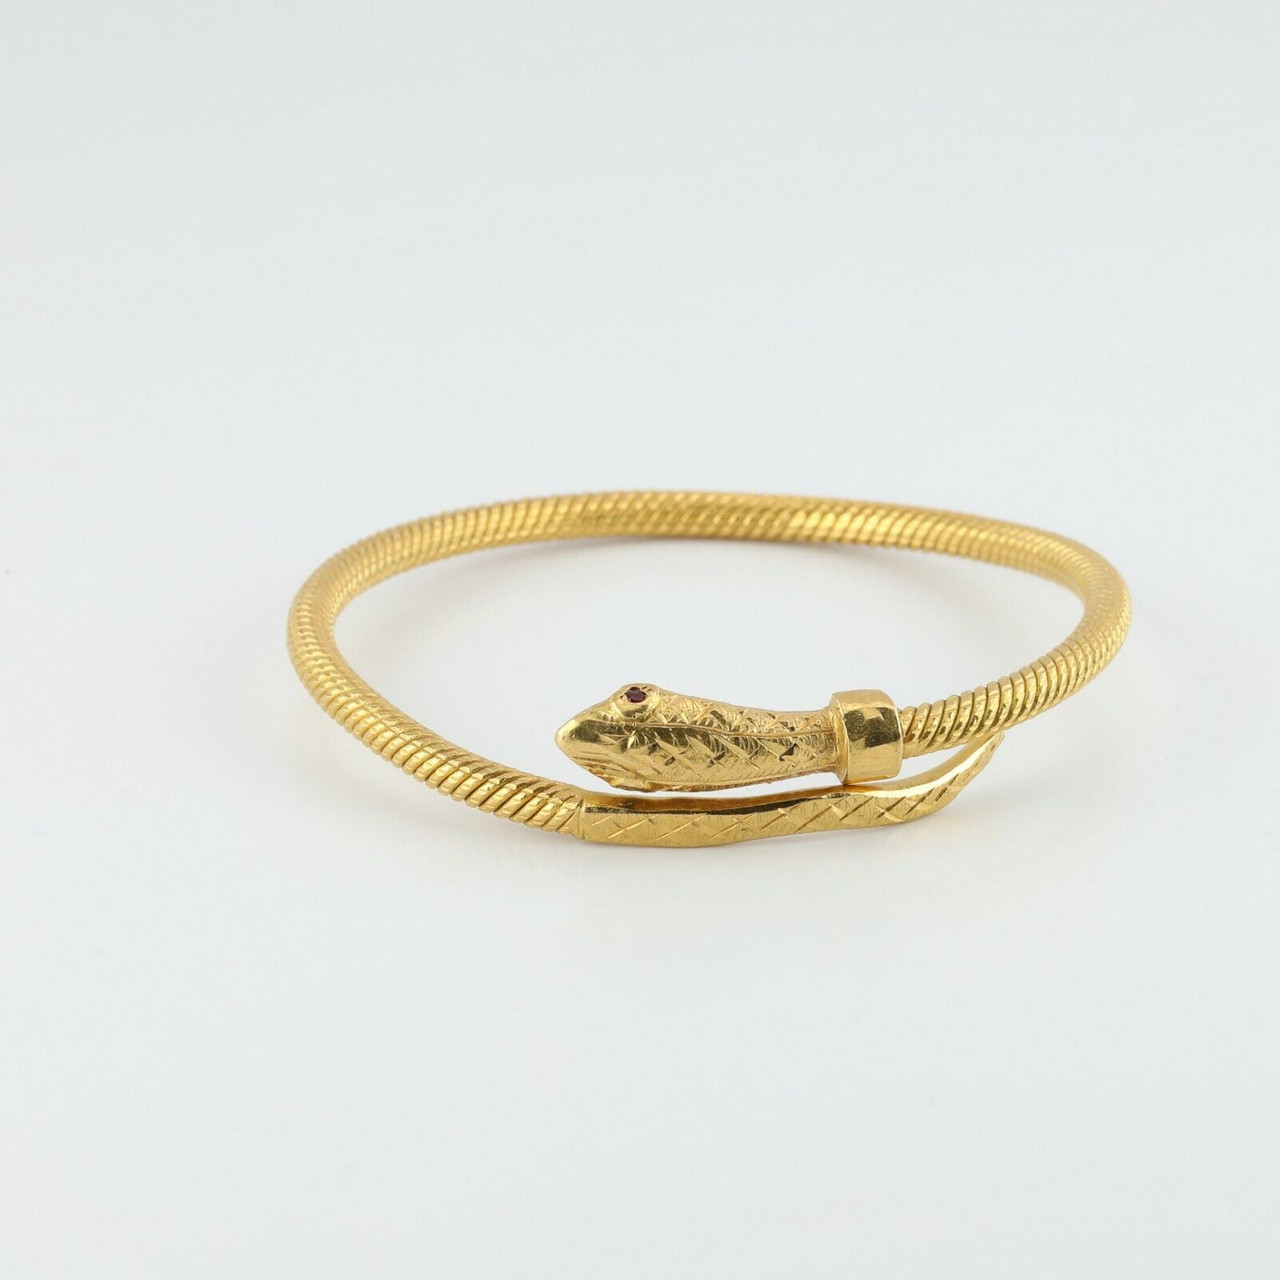 Great Hand Made 21K Snake Bracelet Yellow Gold with Ruby Eyes